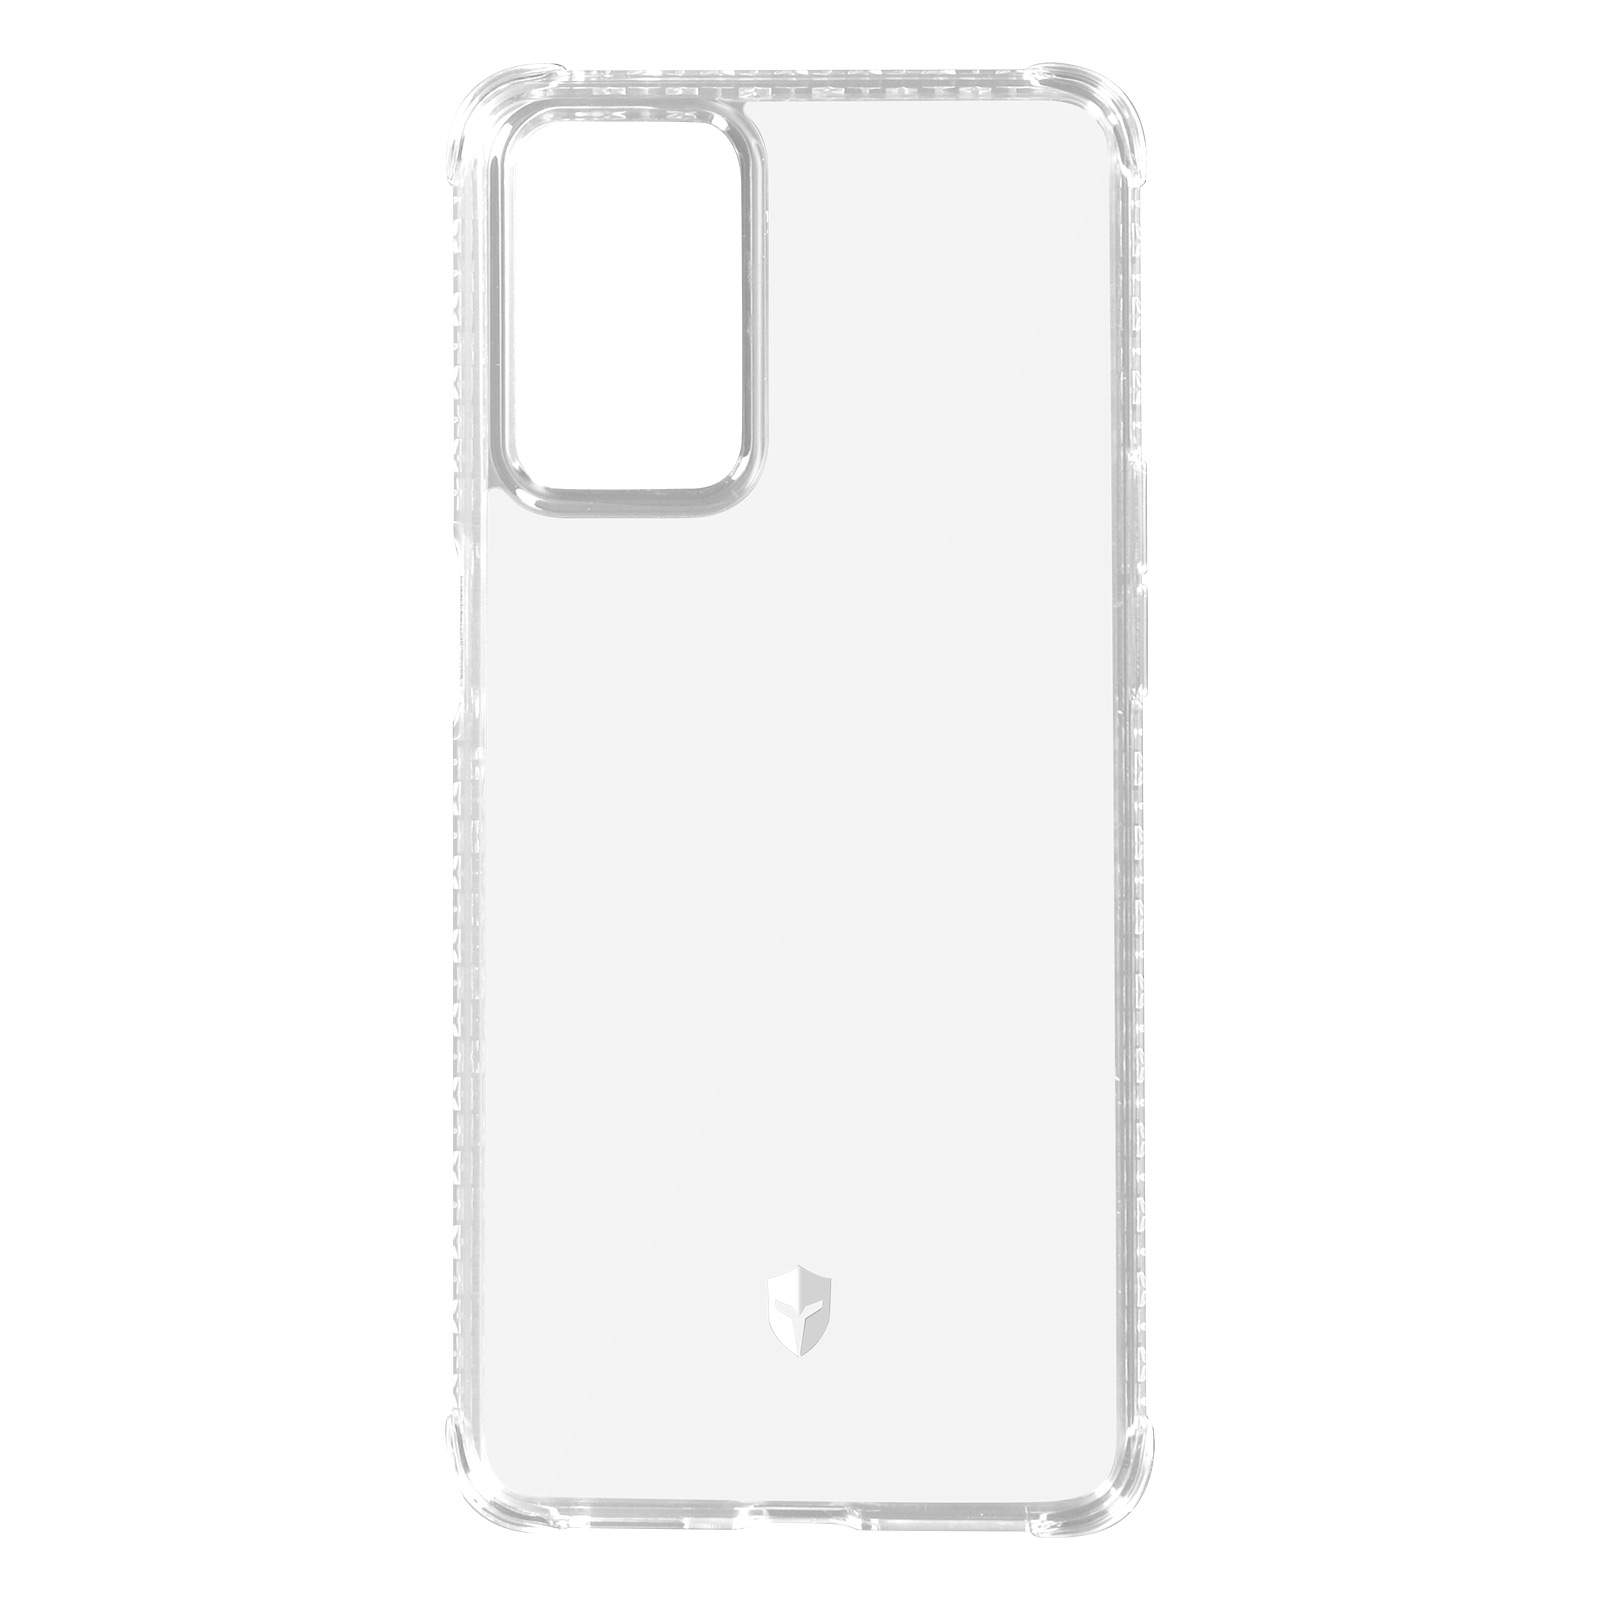 5G, 6 Reno Series, Backcover, Transparent Oppo, BIGBEN Air